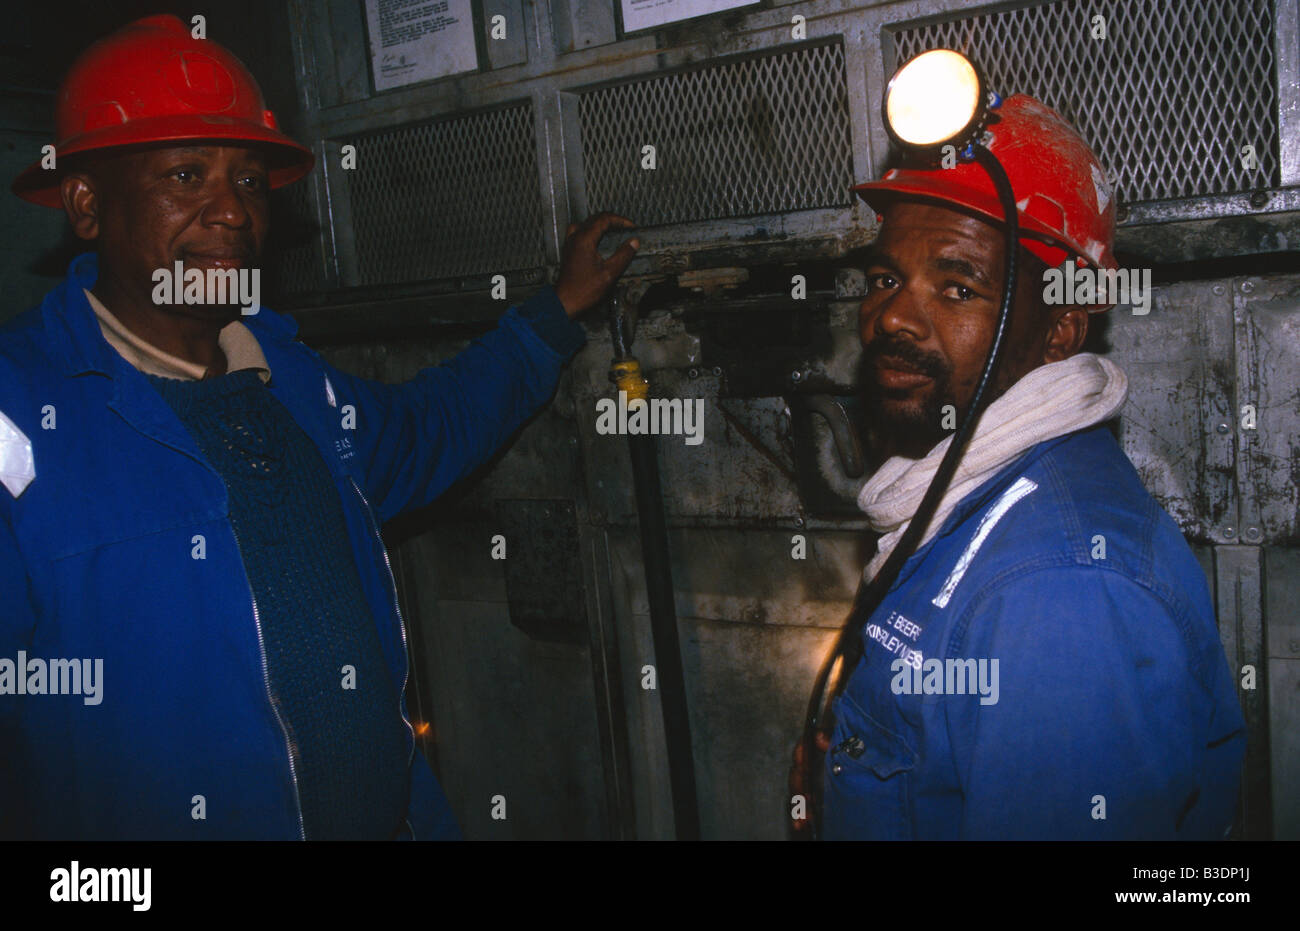 Two diamond miners at De Beers diamond mine, Kimberley, South Africa, Africa Stock Photo